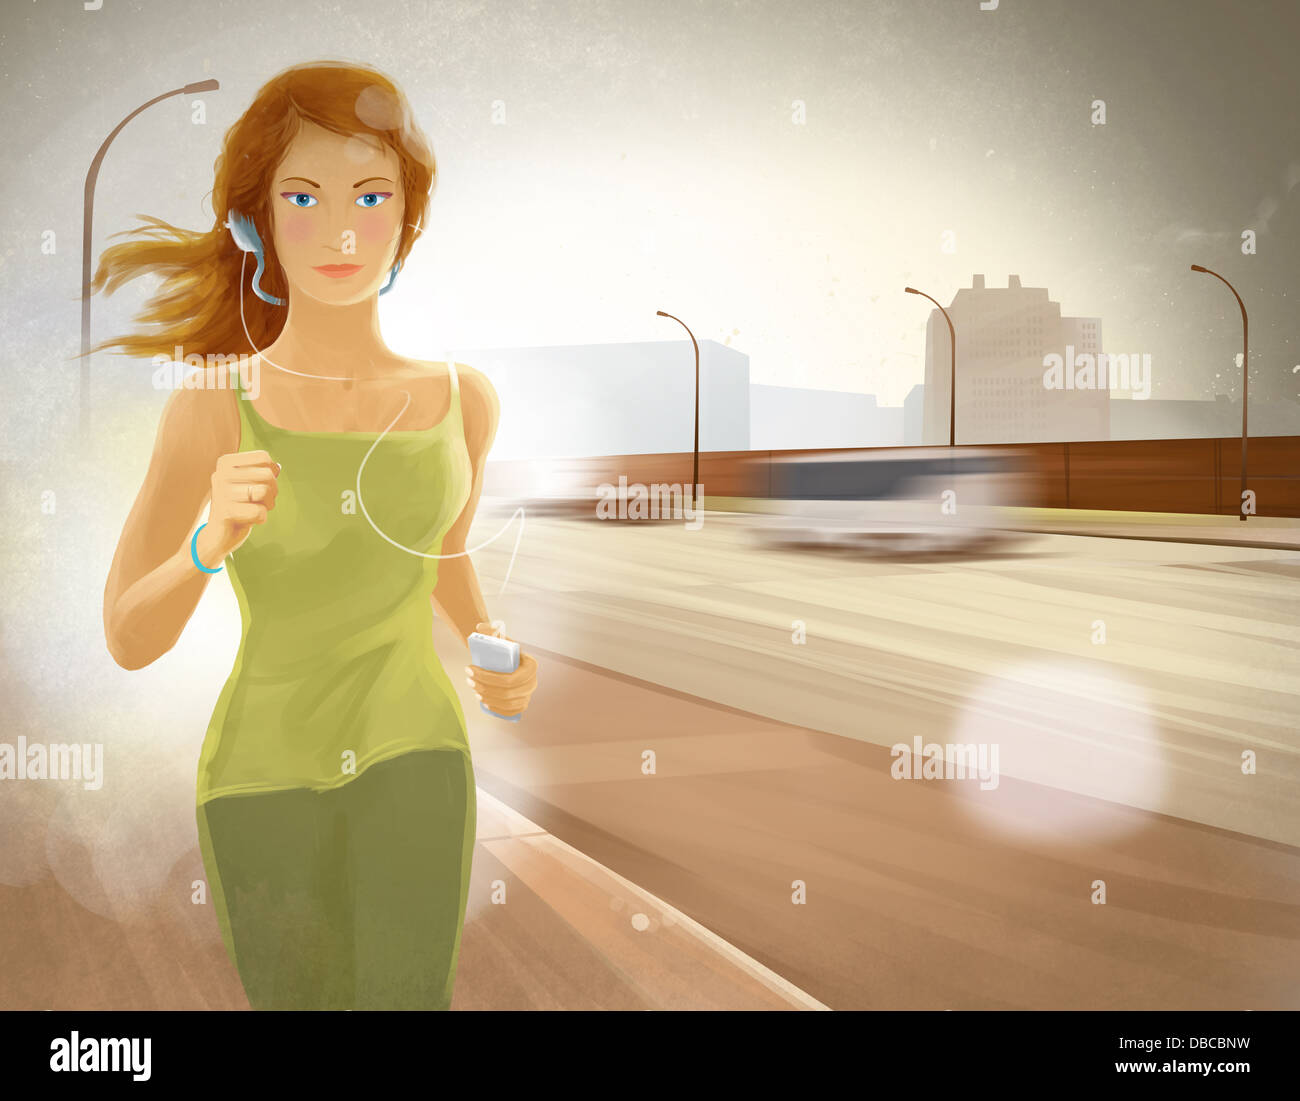 Illustration of young woman jogging while listening to music from MP3 player on sidewalk Stock Photo